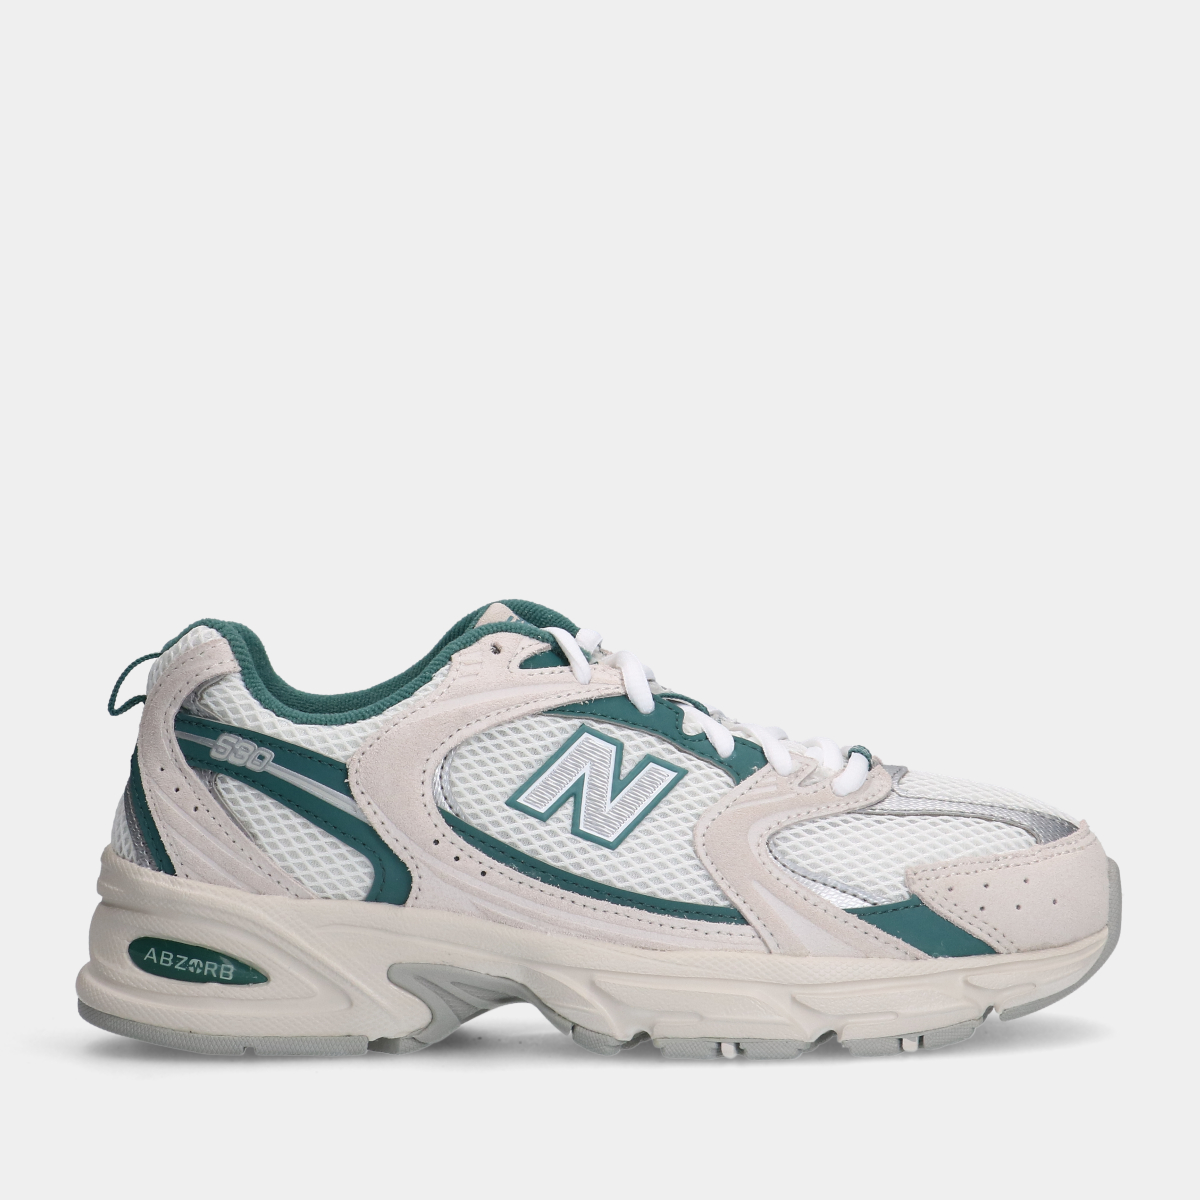 New balance 530 off-white sneakers